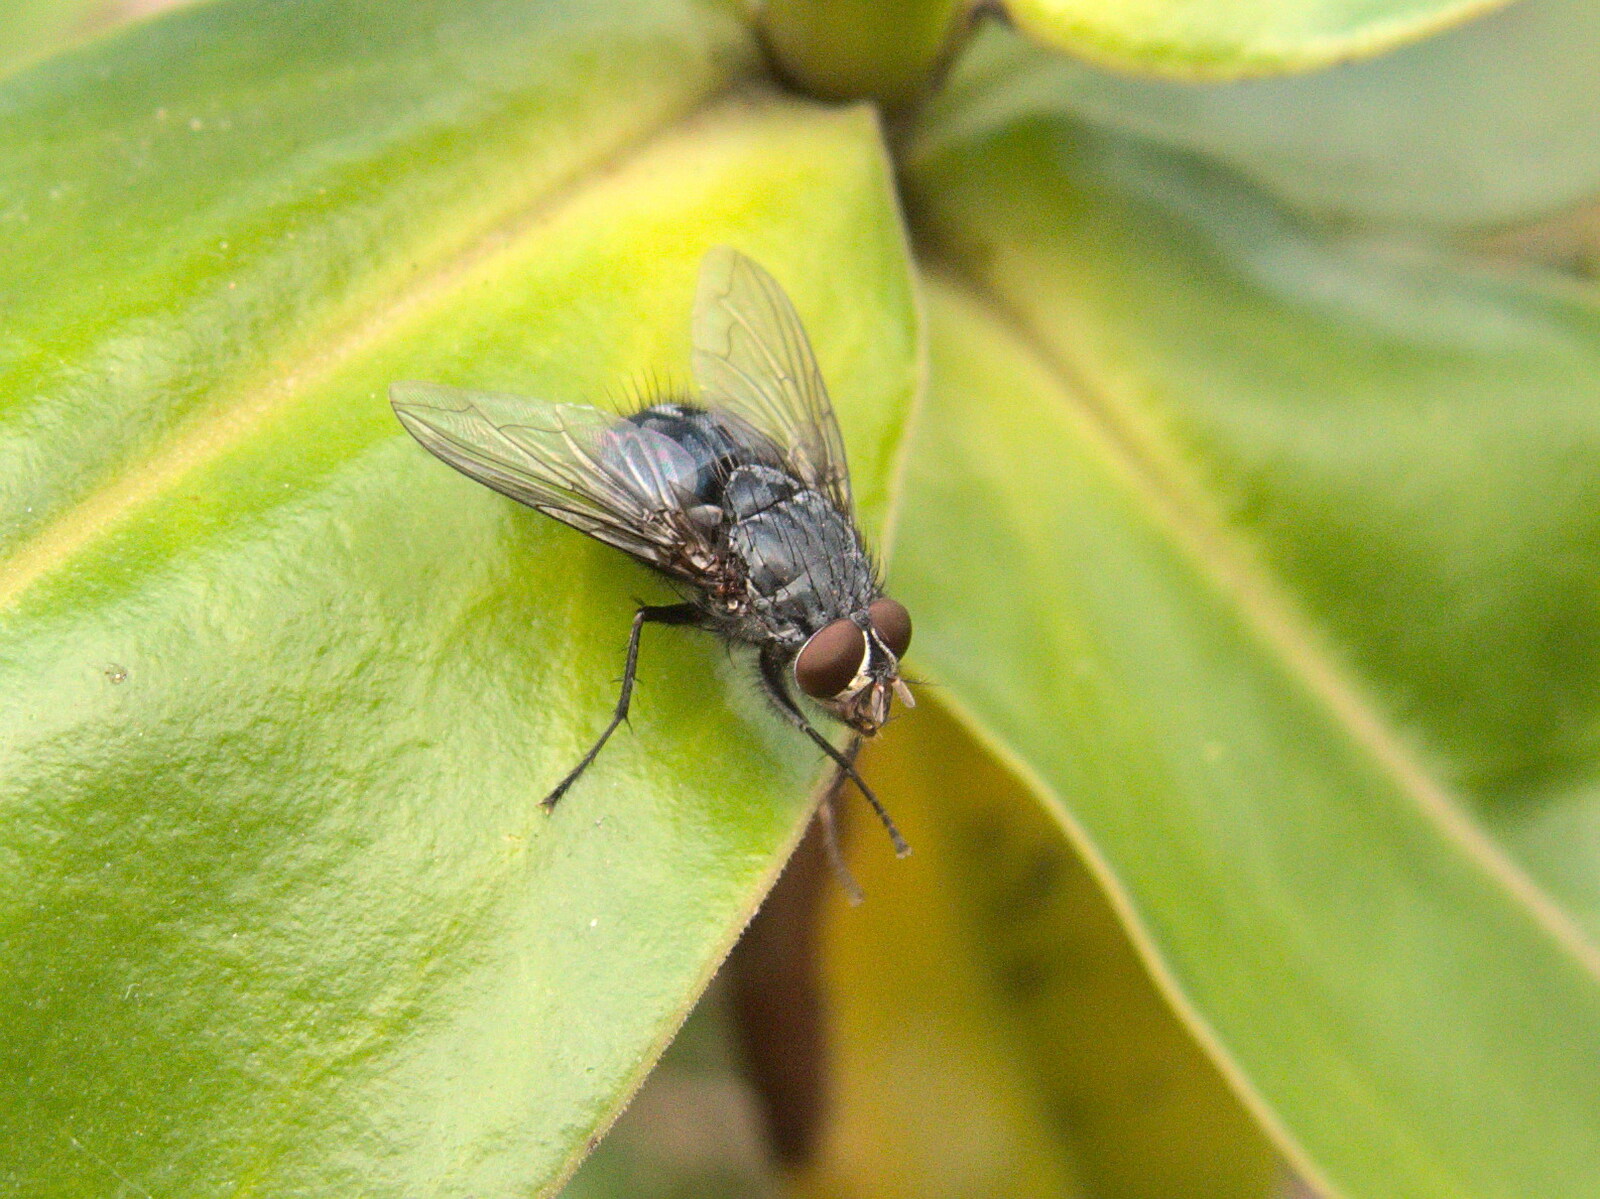 Giant fly, or small fly close-up? from Camping in West Runton, North Norfolk - 30th July 2016